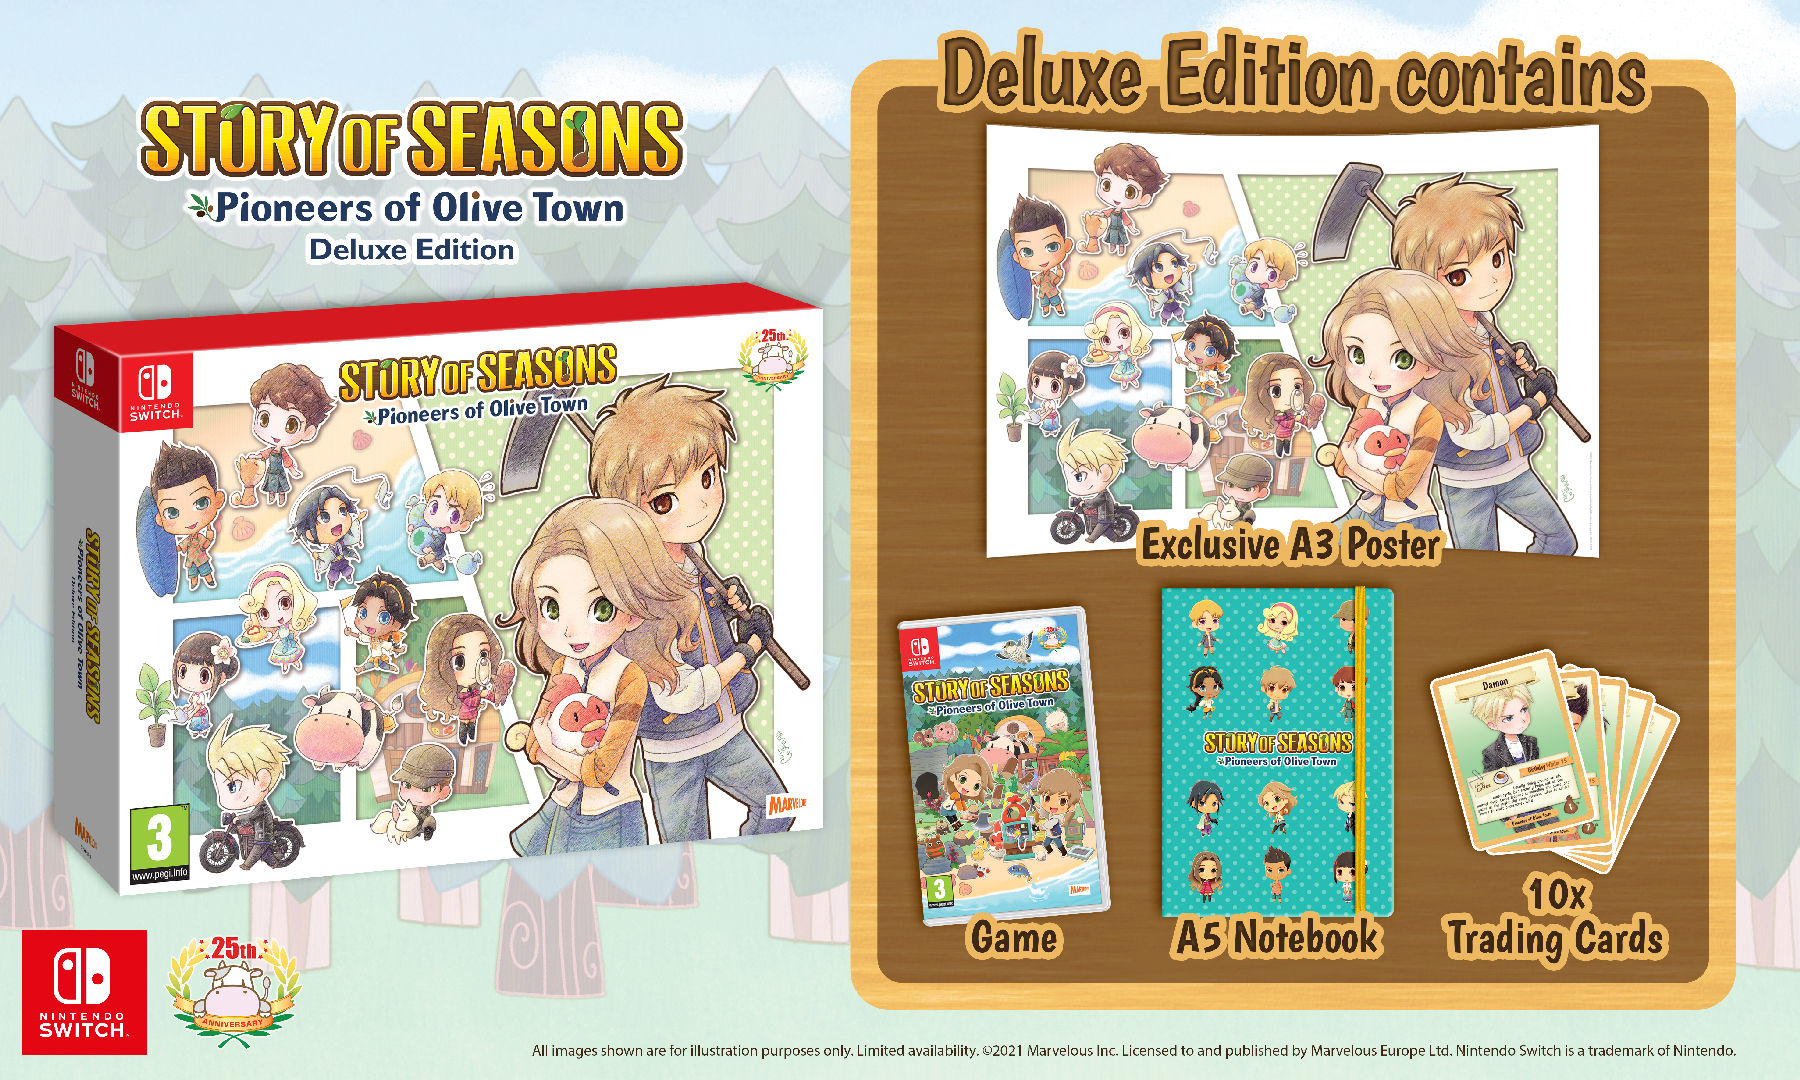 Story of Seasons: Pioneers of Olive Town - Deluxe Editon